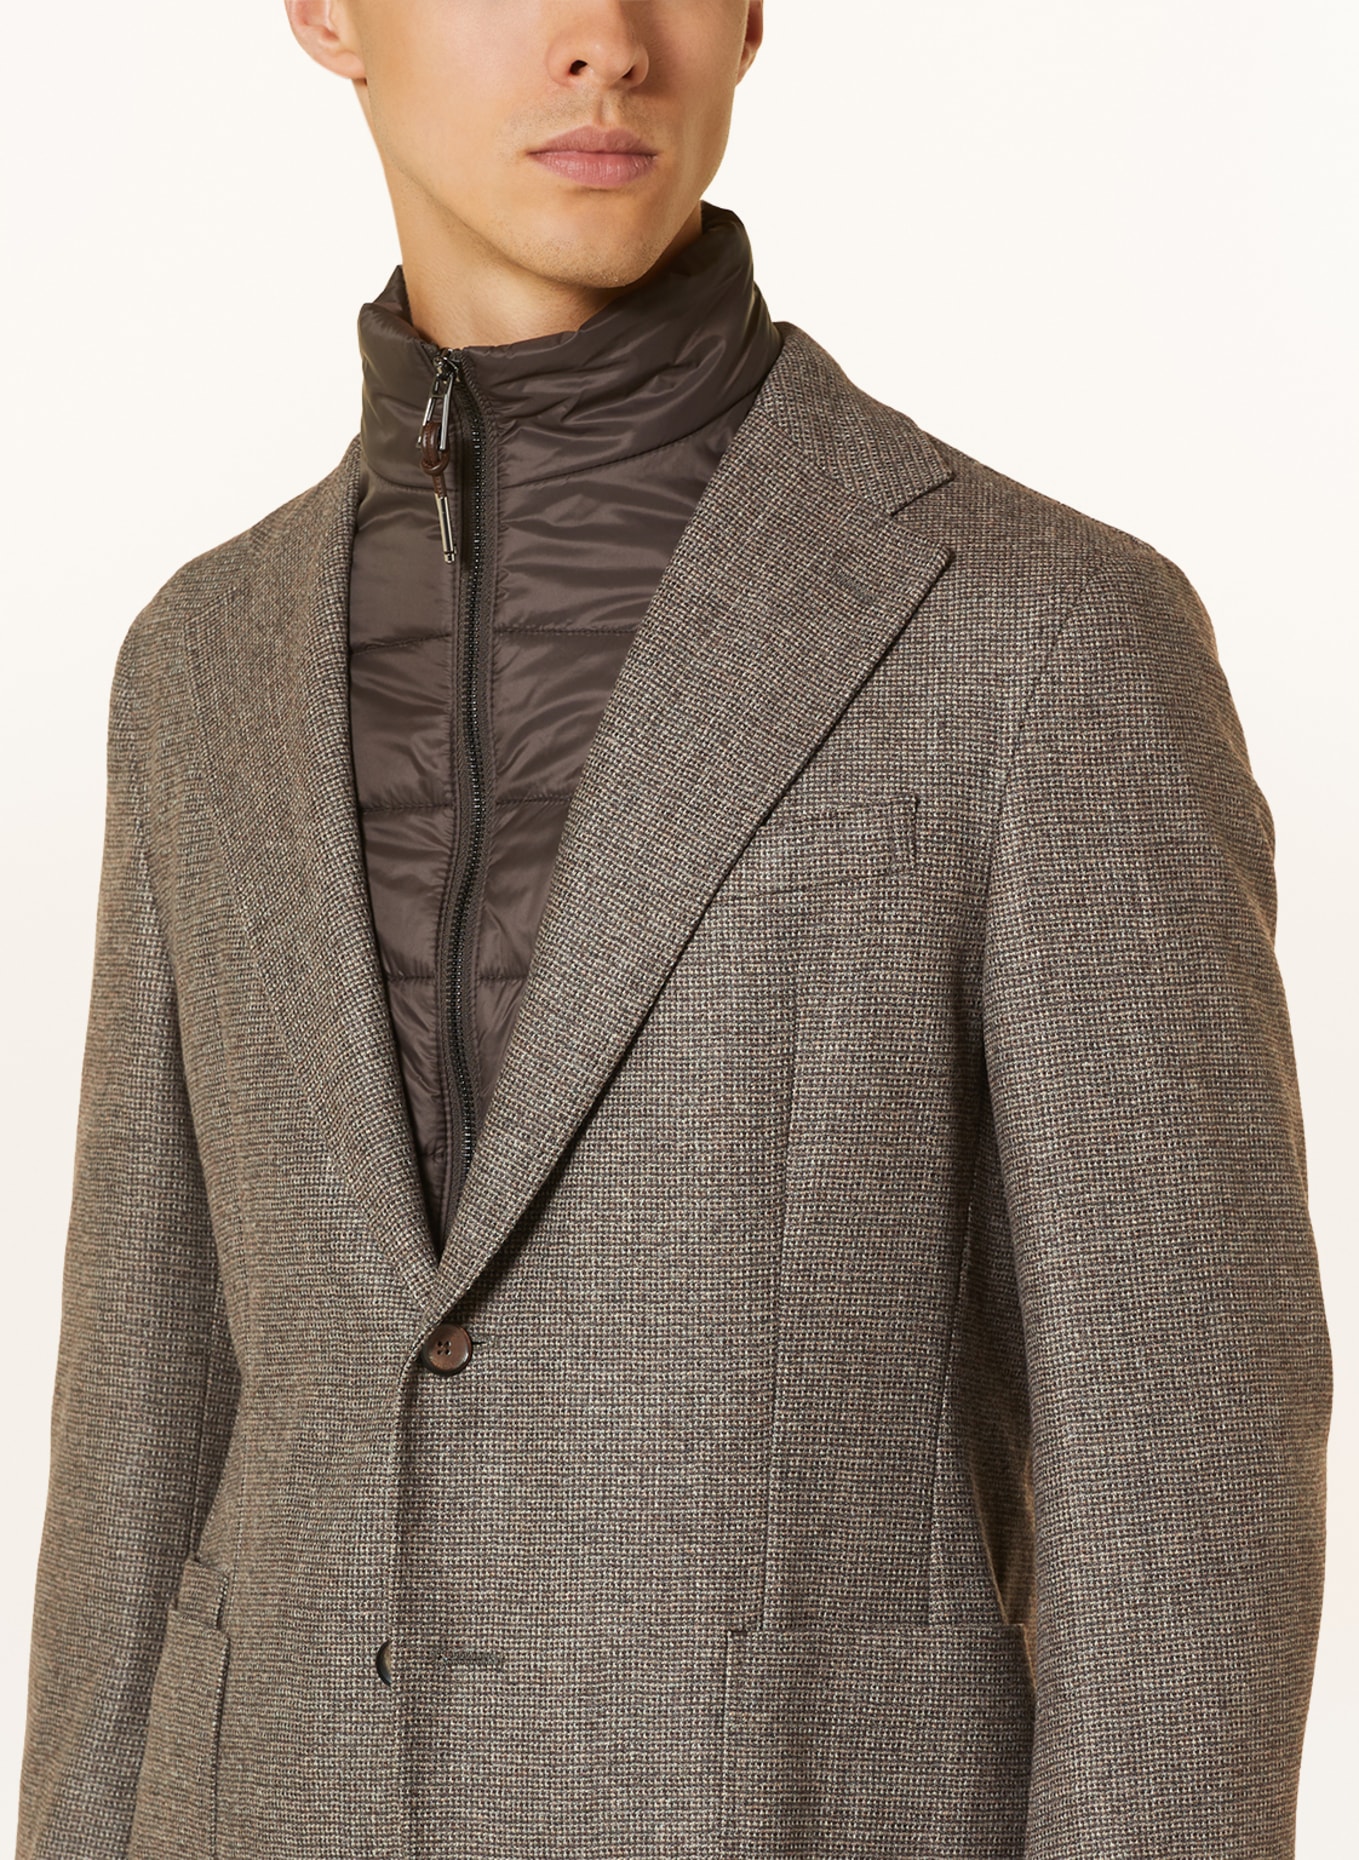 windsor. Tailored jacket TRIEST extra slim fit with detachable trim, Color: DARK BROWN/ BEIGE (Image 5)